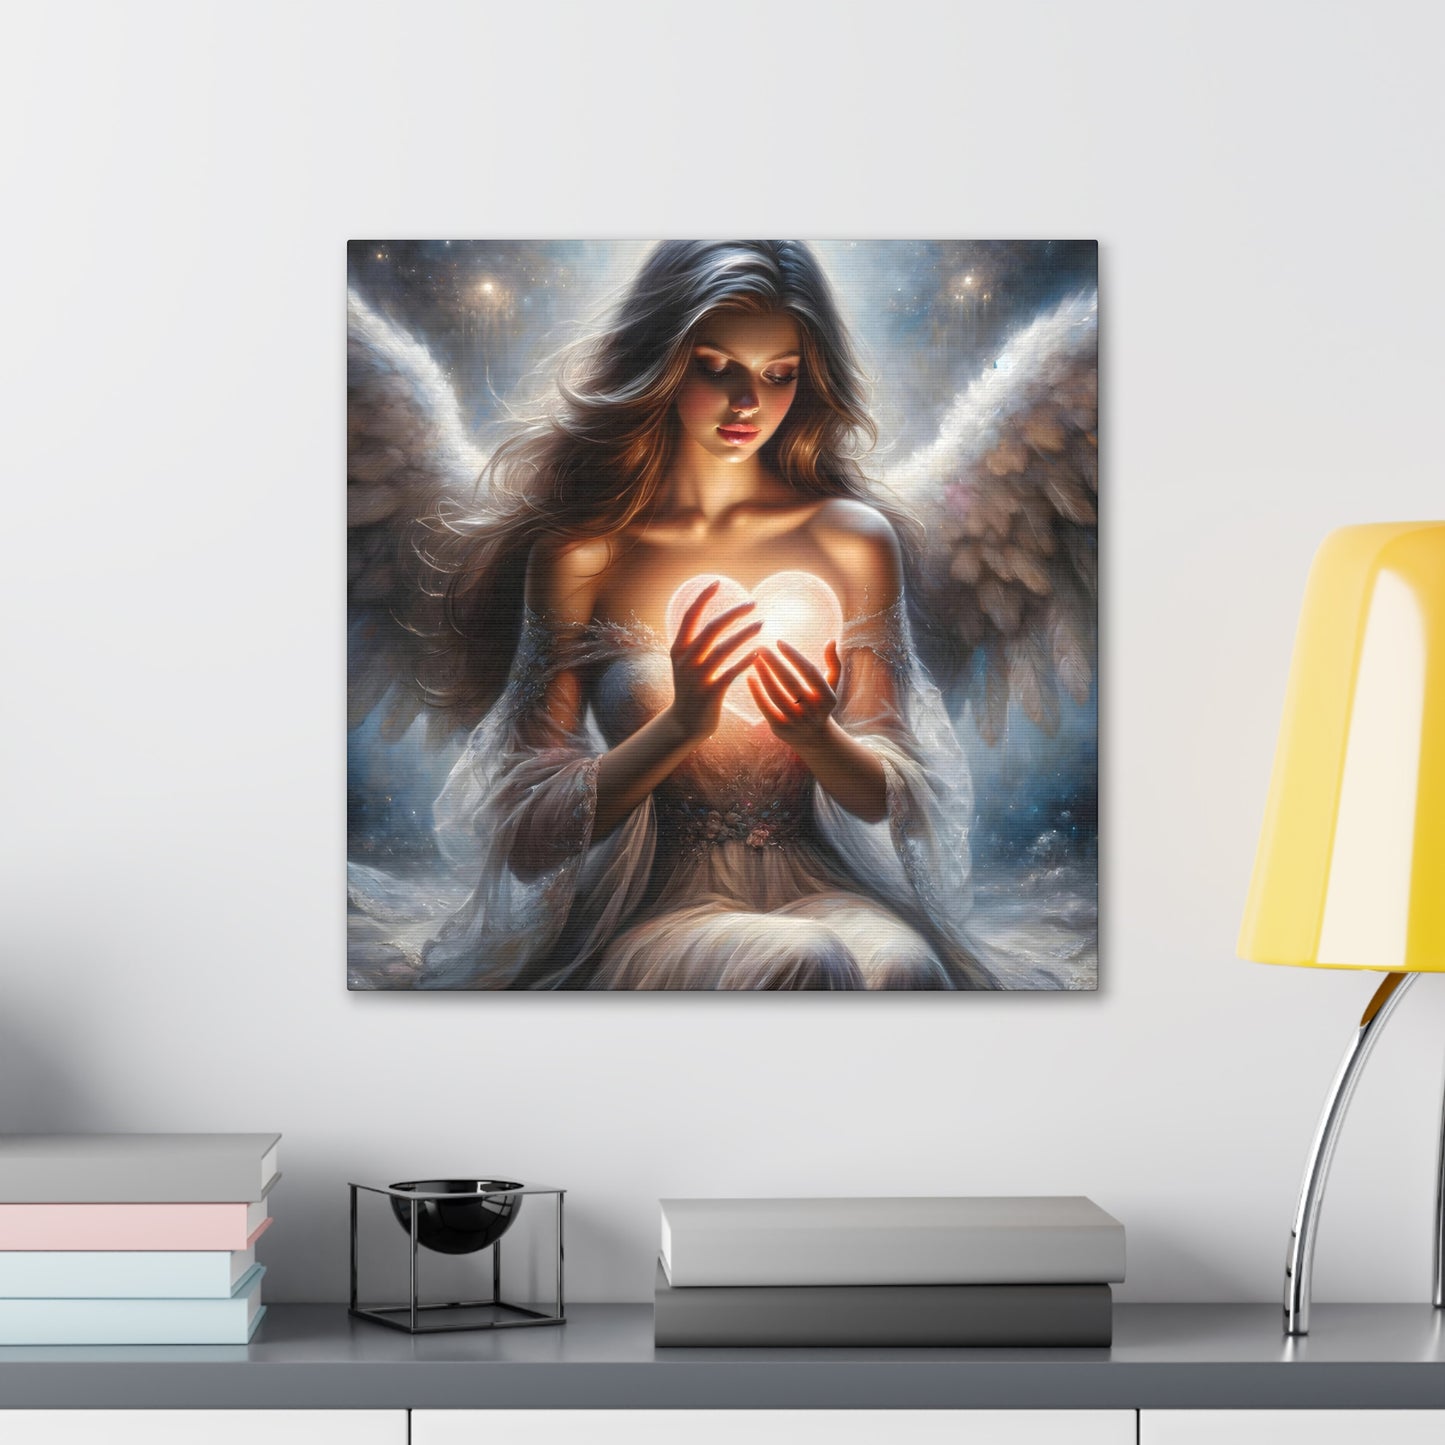 in situ with desk Celestial Embrace' canvas wall art by Aurora, featuring an angelic being cradling a glowing heart to symbolize the purity and passion of love. The artwork is rich in ethereal details and luminescent tones, creating a serene yet powerful ambiance, ideal for those who love heavenly-inspired decor with a romantic touch.